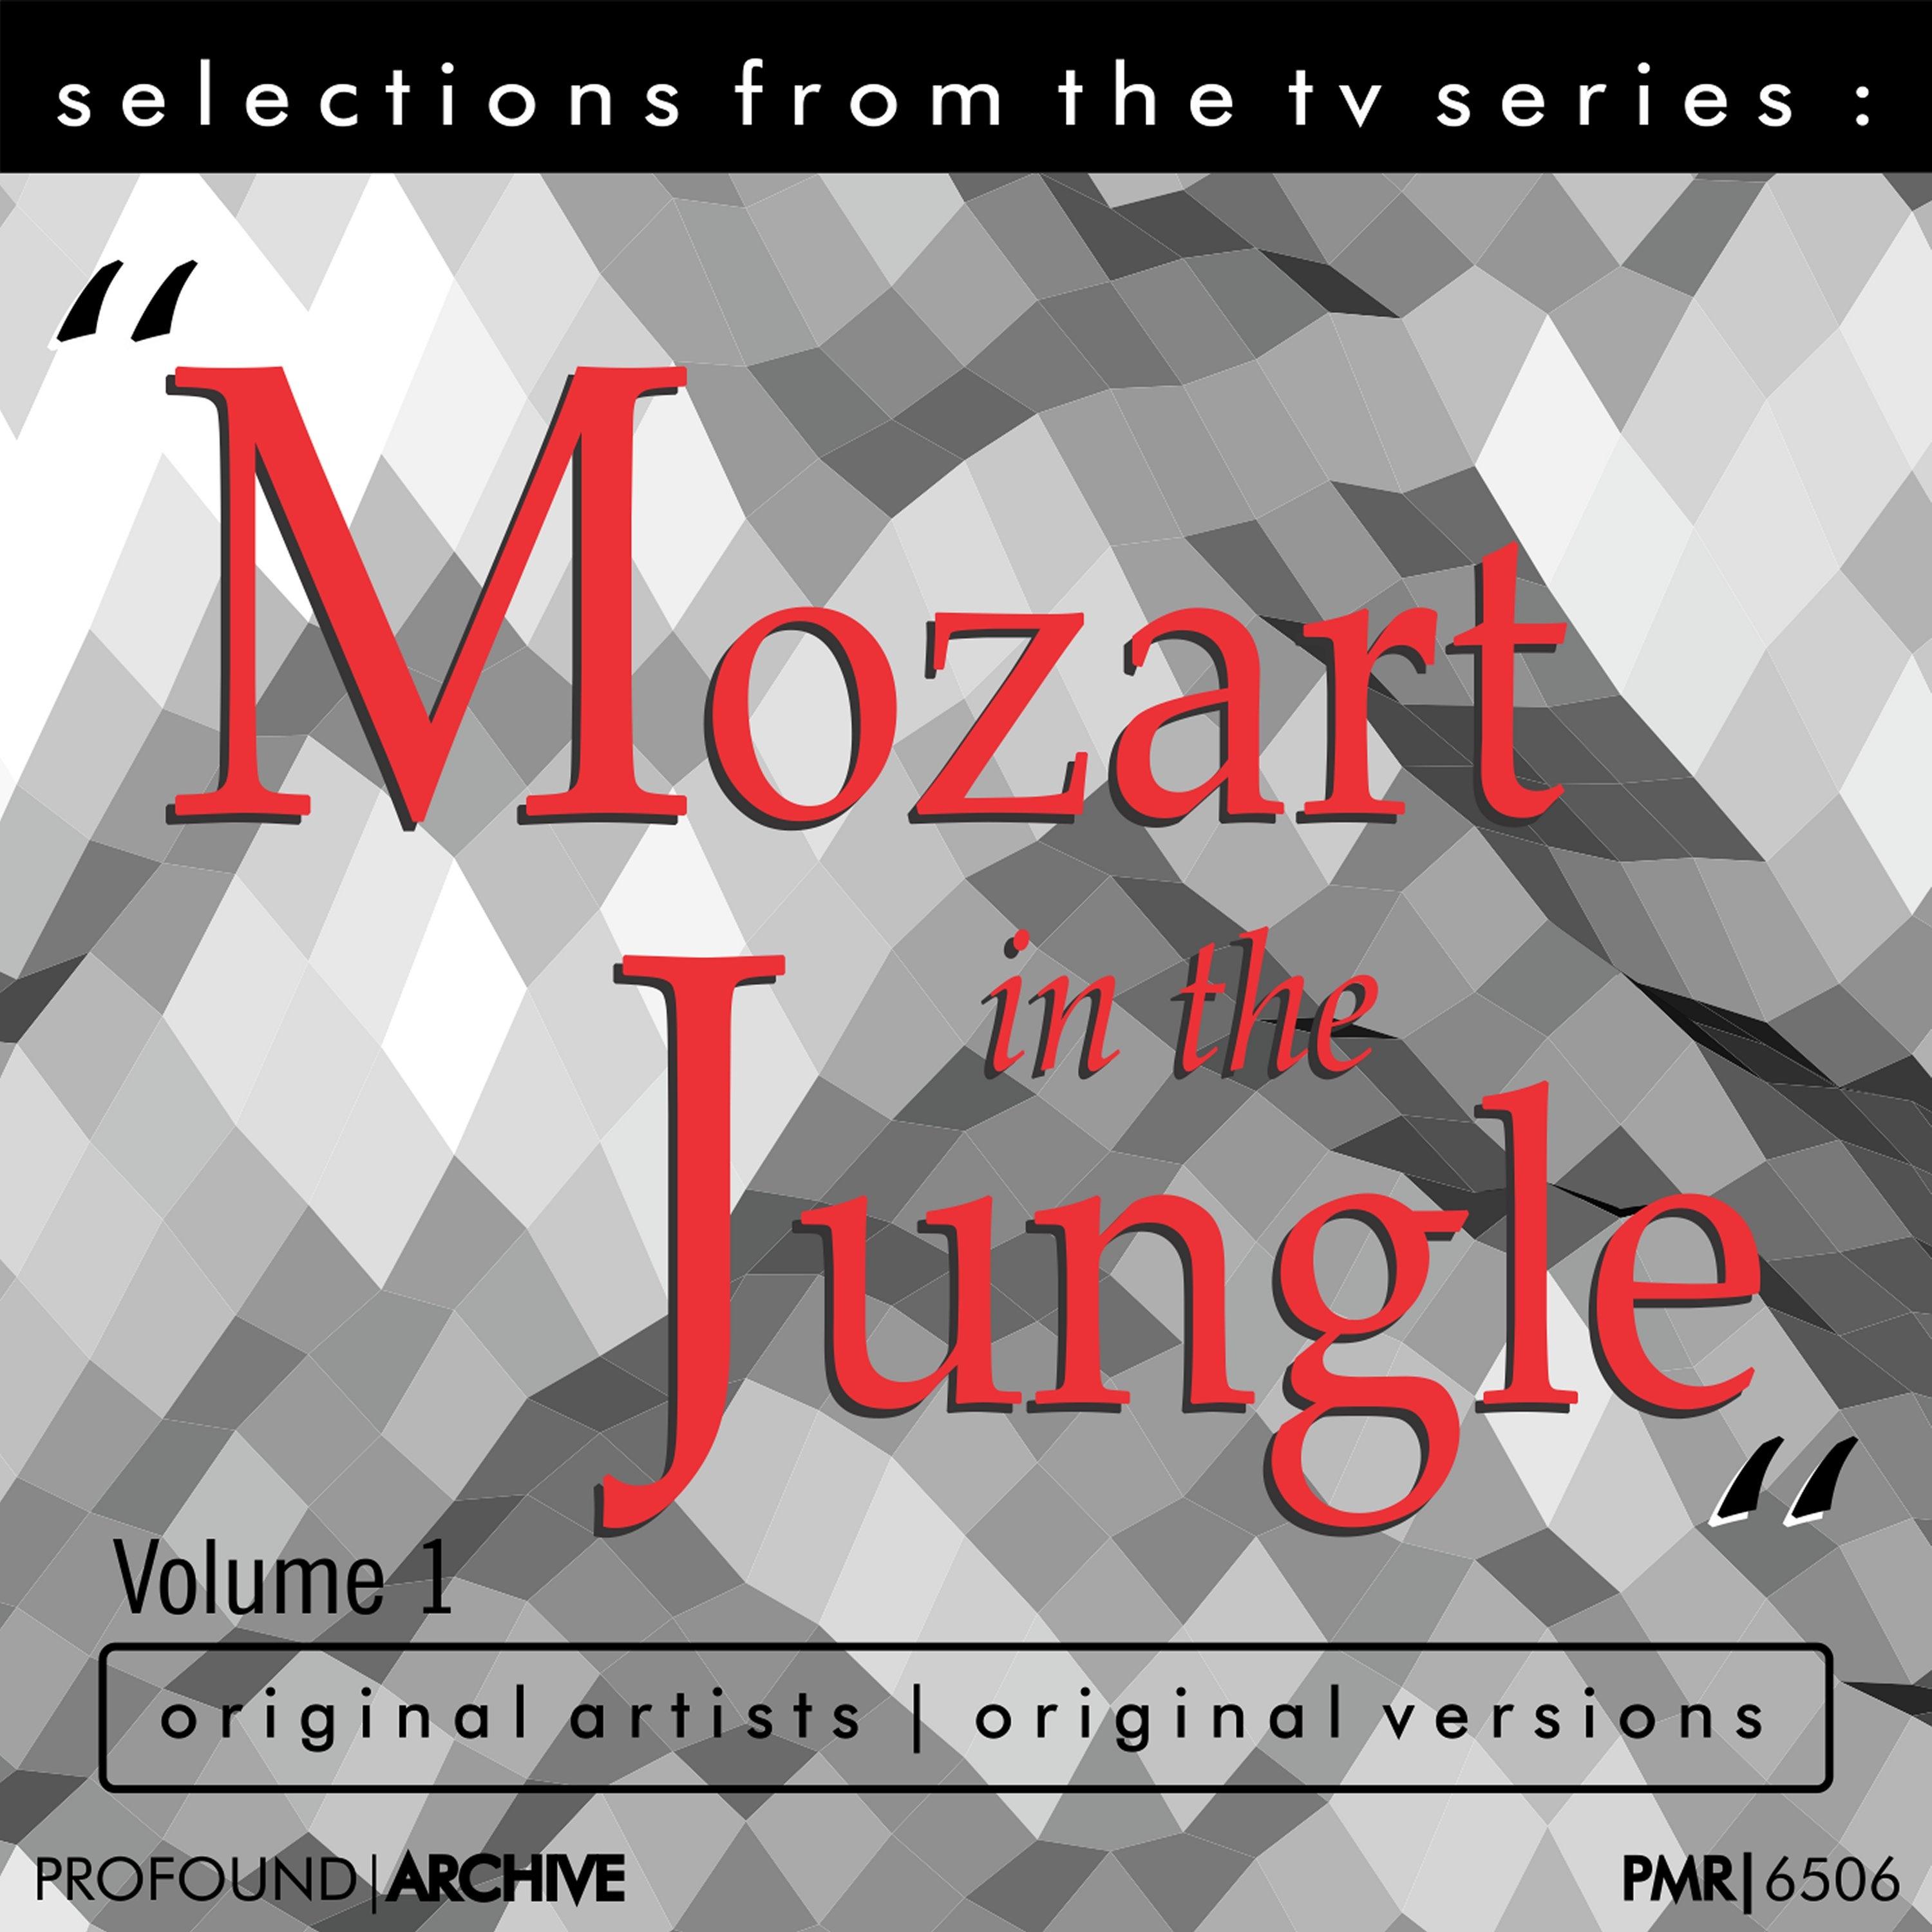 Selections from the TV Serie Mozart in the Jungle Volume 1